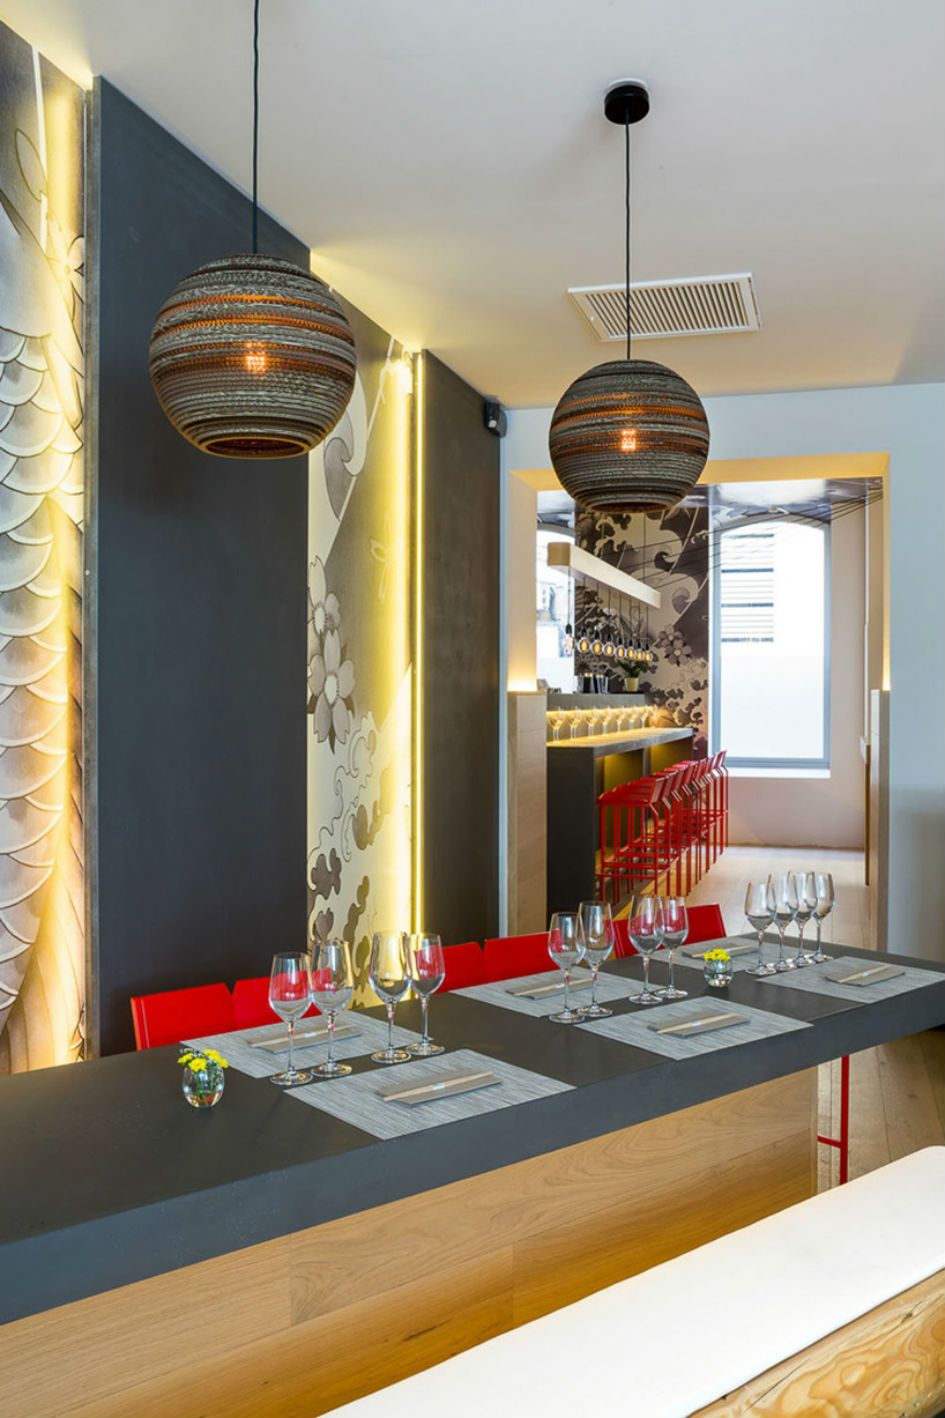 Vincent Coste Designs Japanese Restaurant With Tattoos (10)